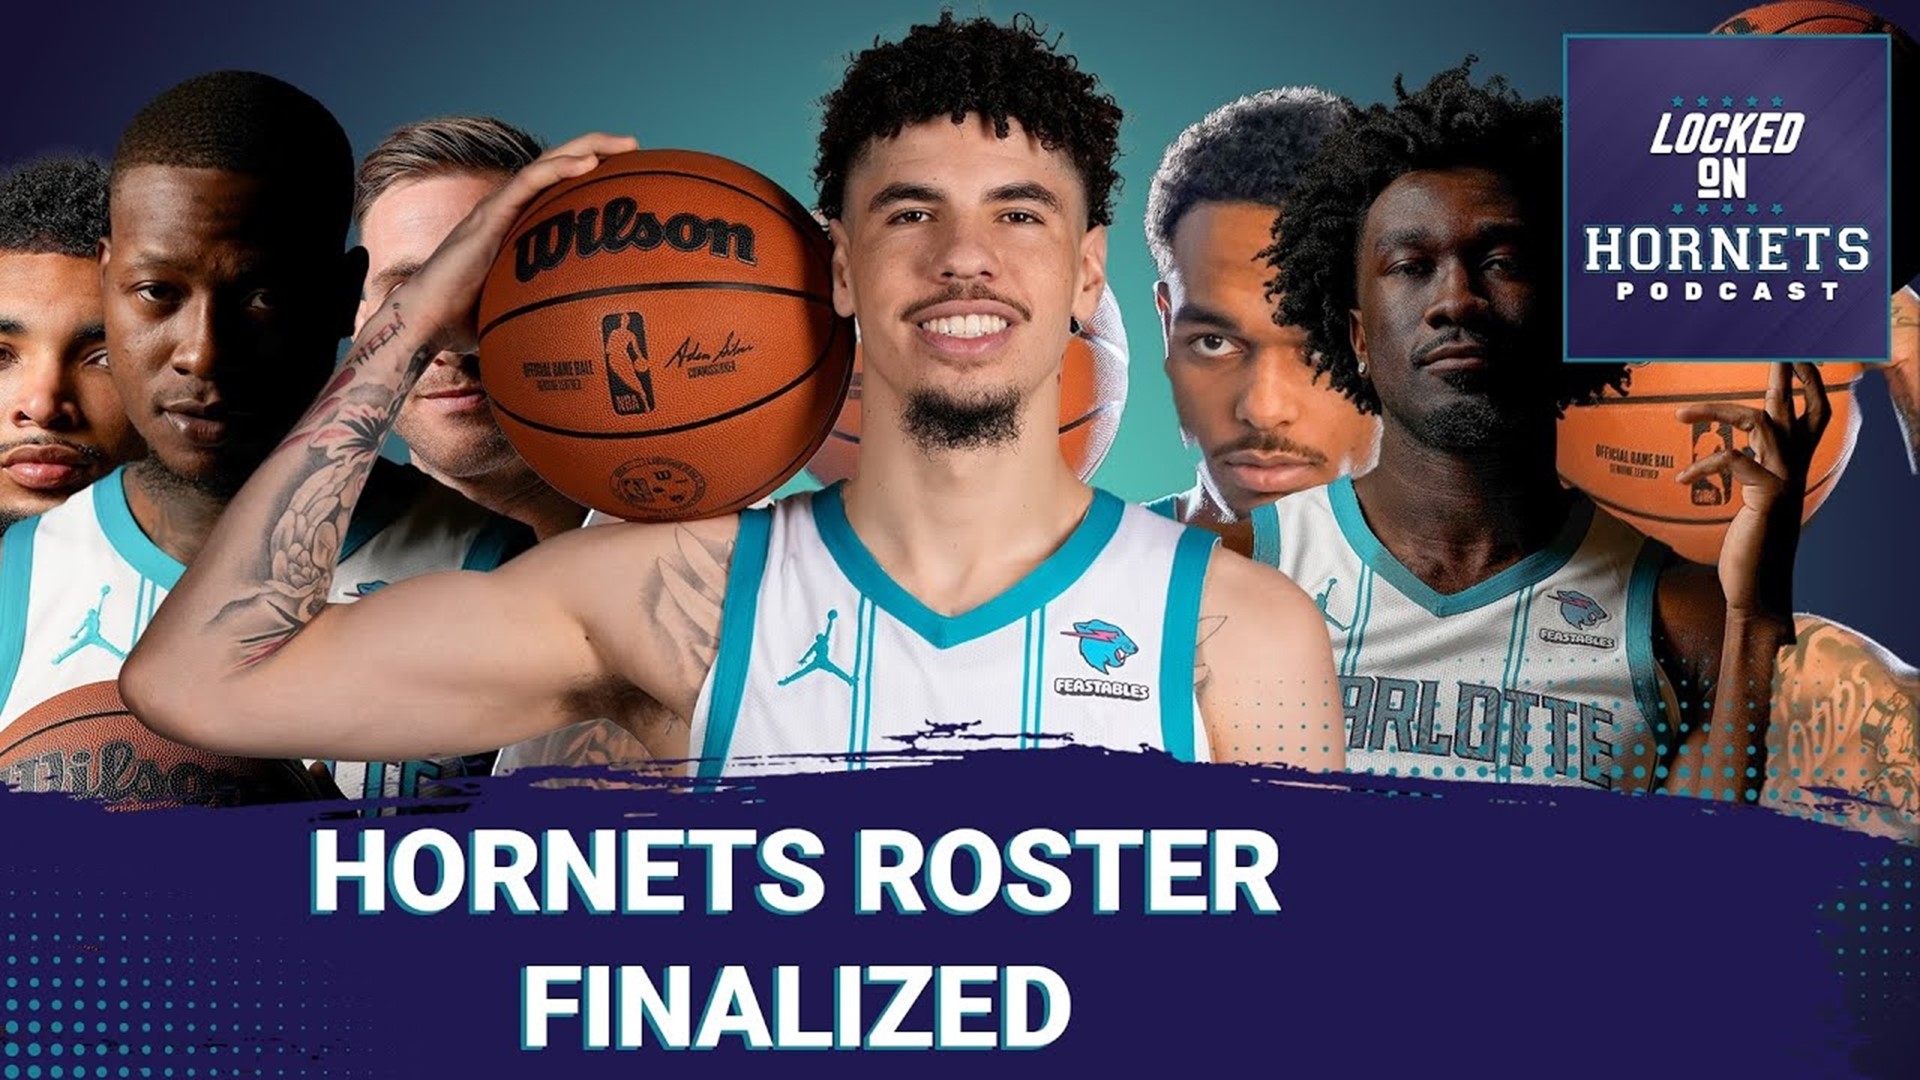 The Charlotte Hornets finalized their roster heading into Wednesday night's game against the Atlanta Hawks. Any surprises?